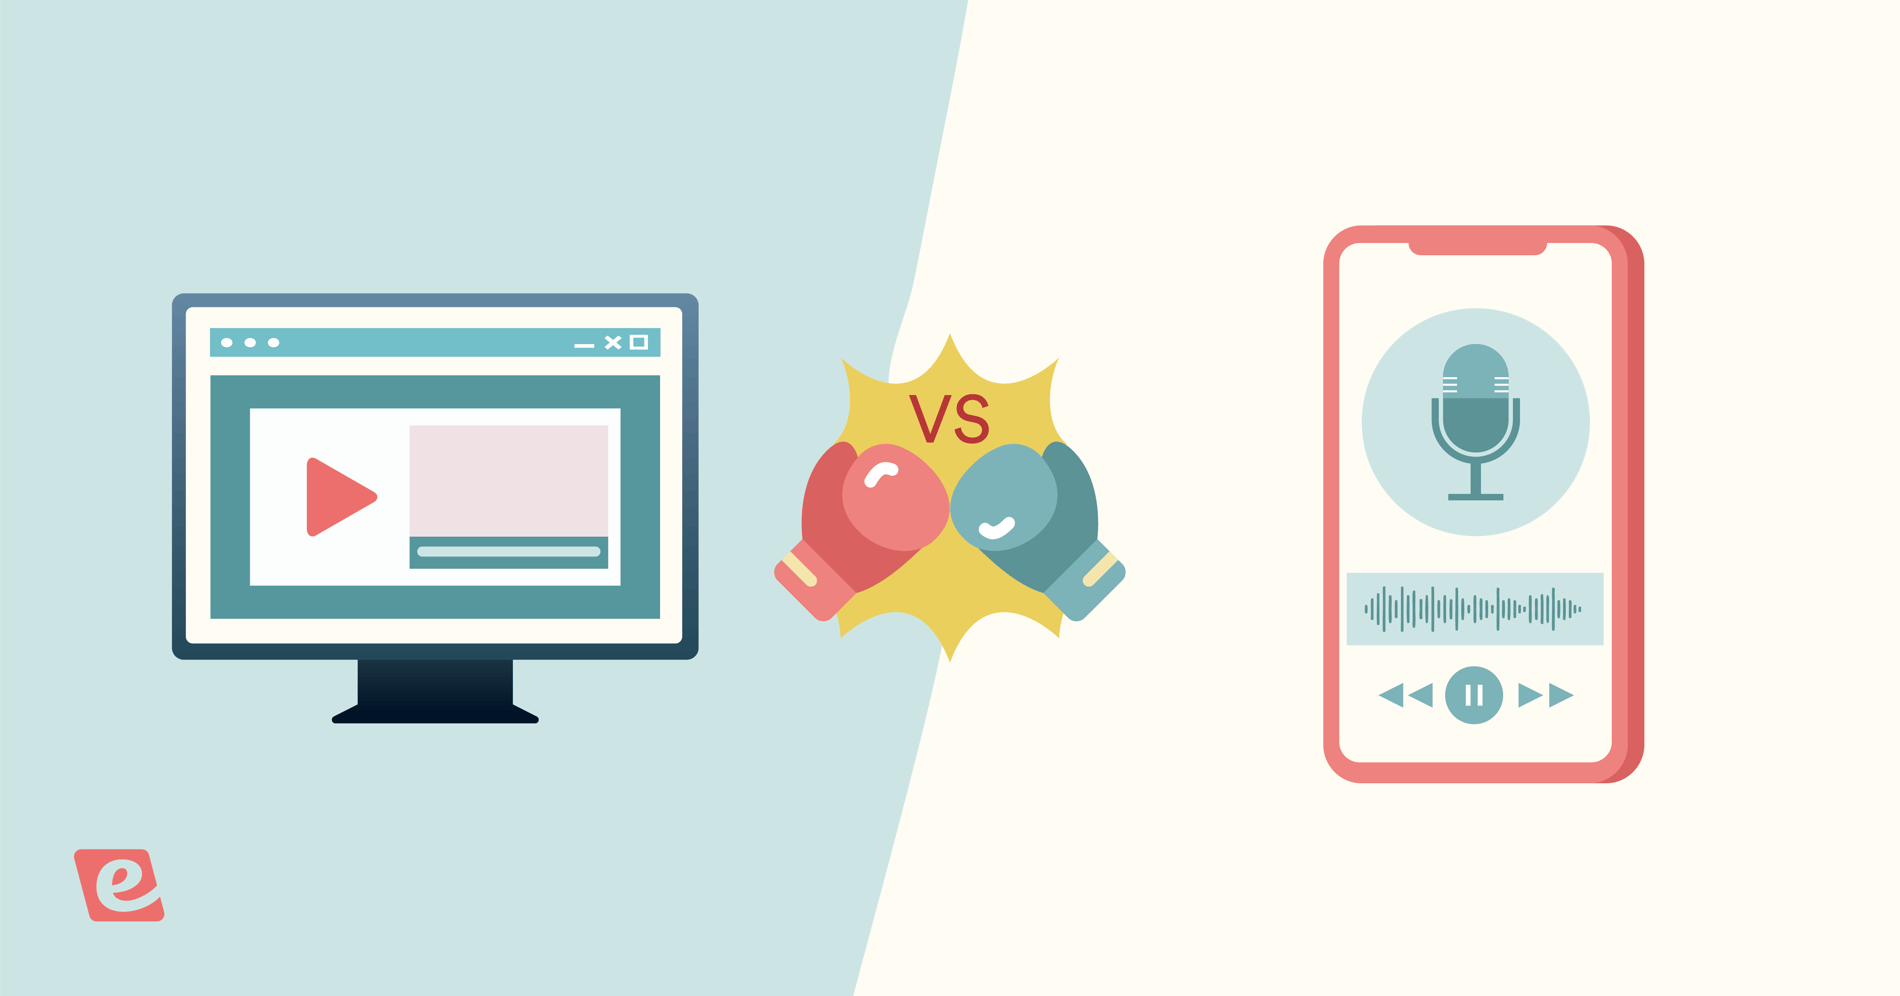 Webinar vs Podcast: Differences and Use Cases